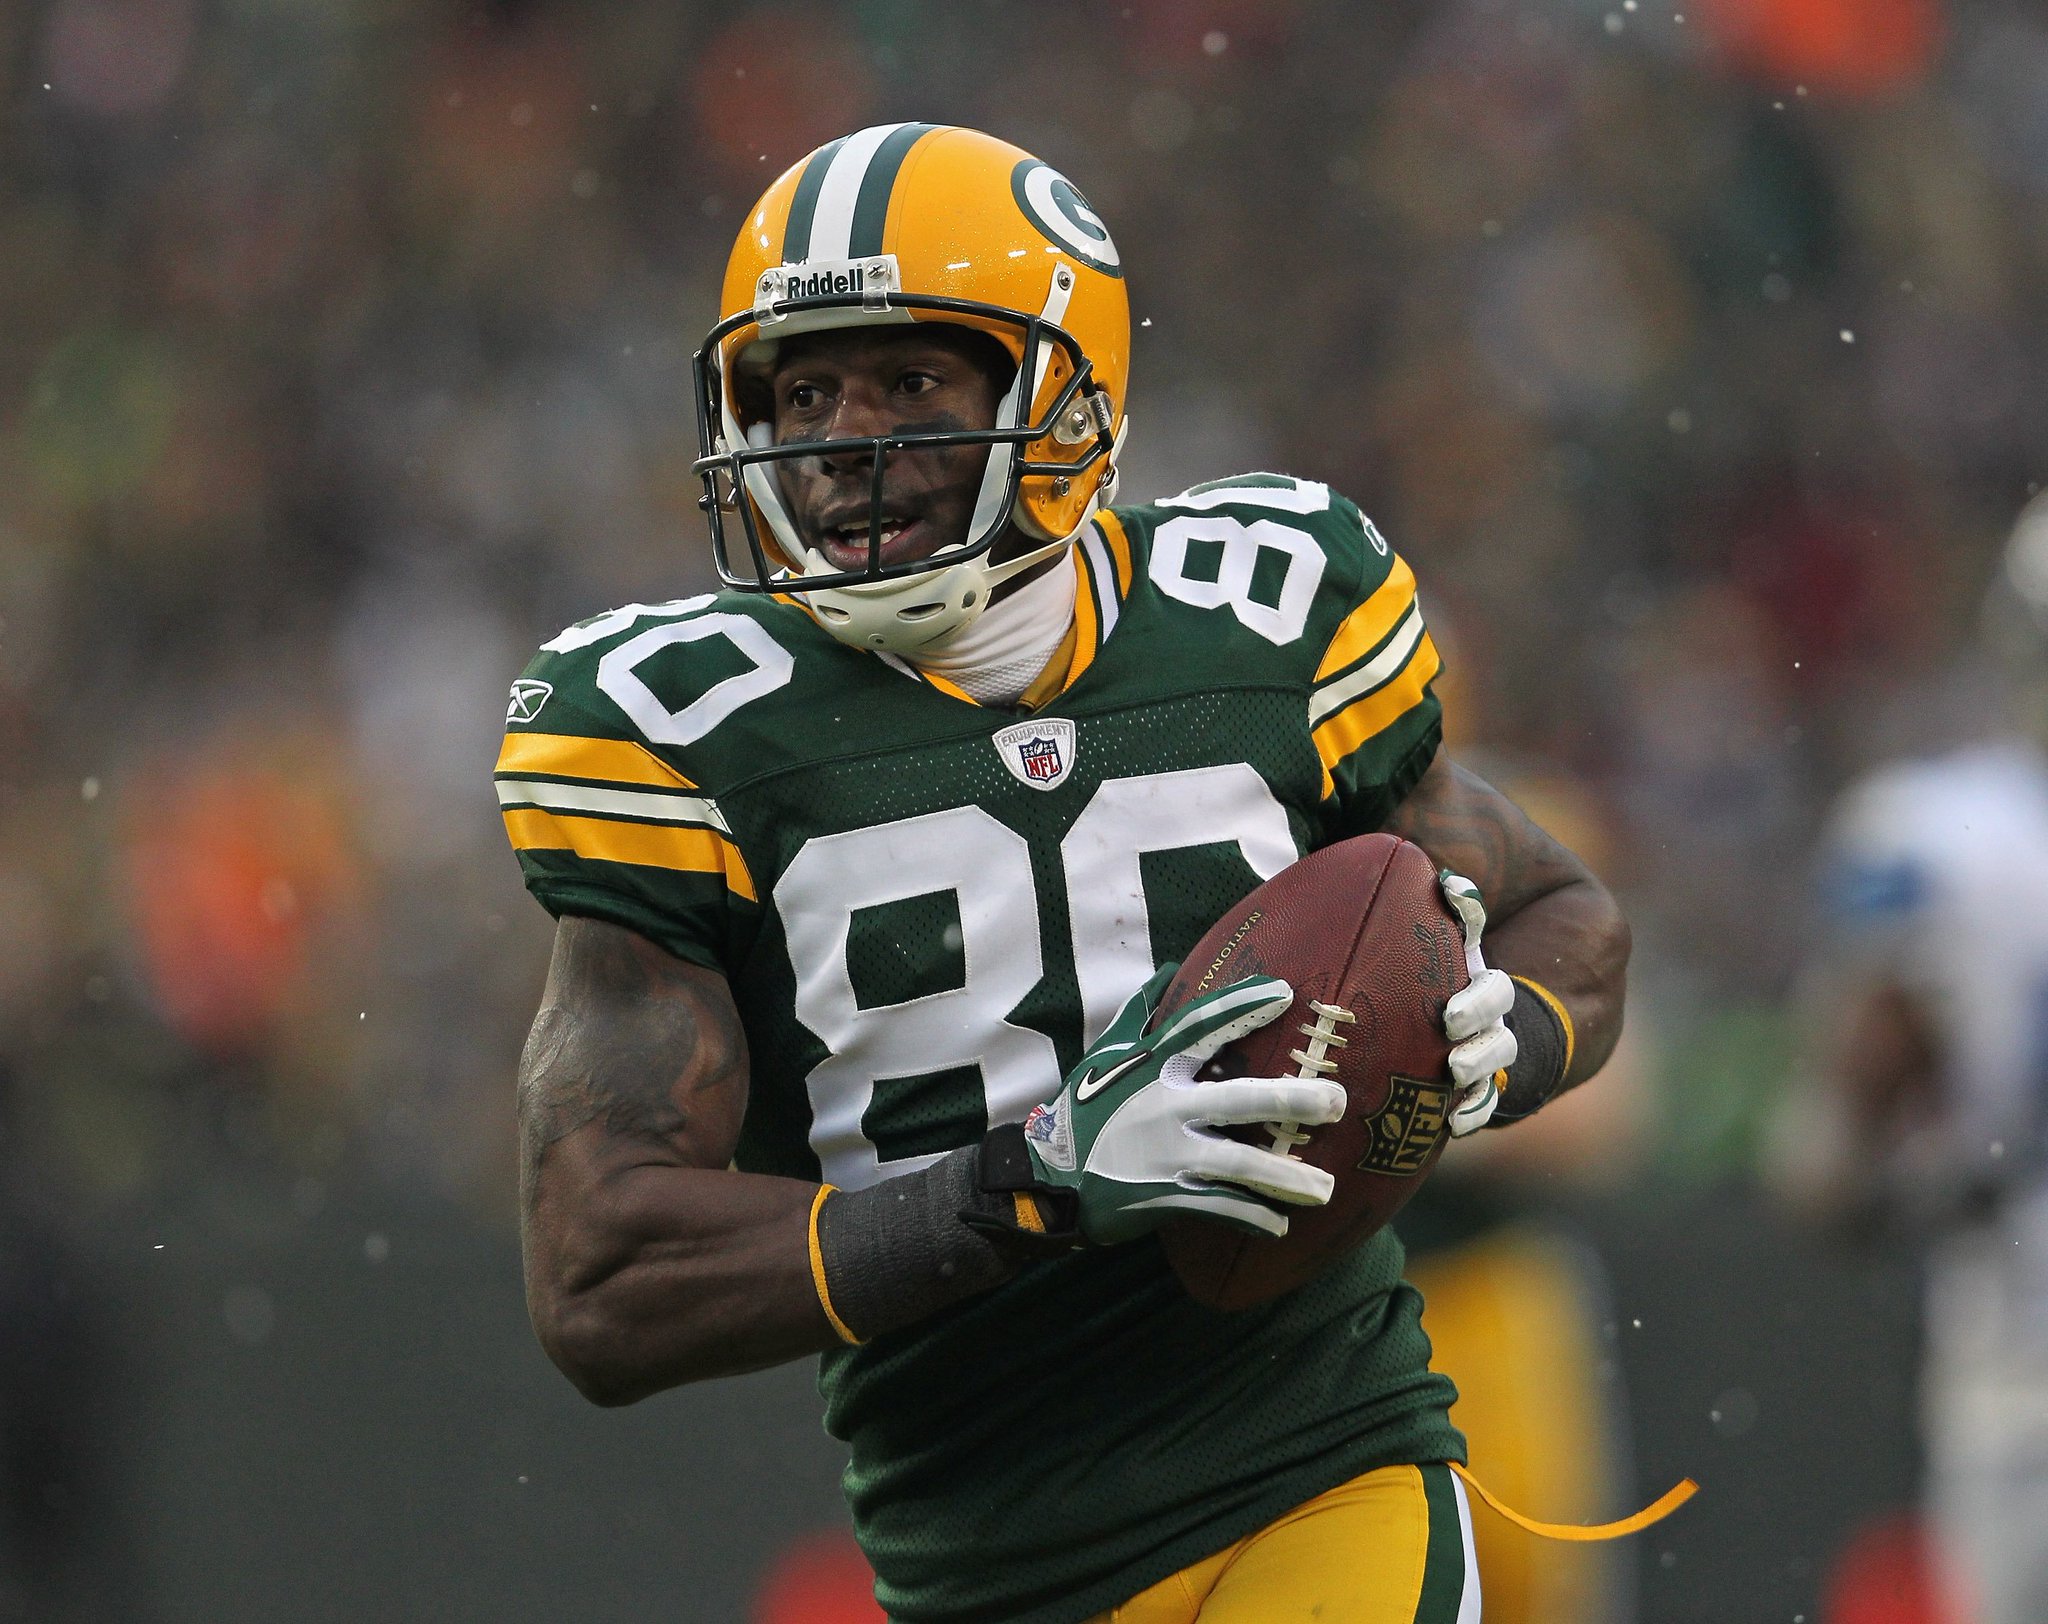 Happy Birthday to Donald Driver, who turns 42 today! 